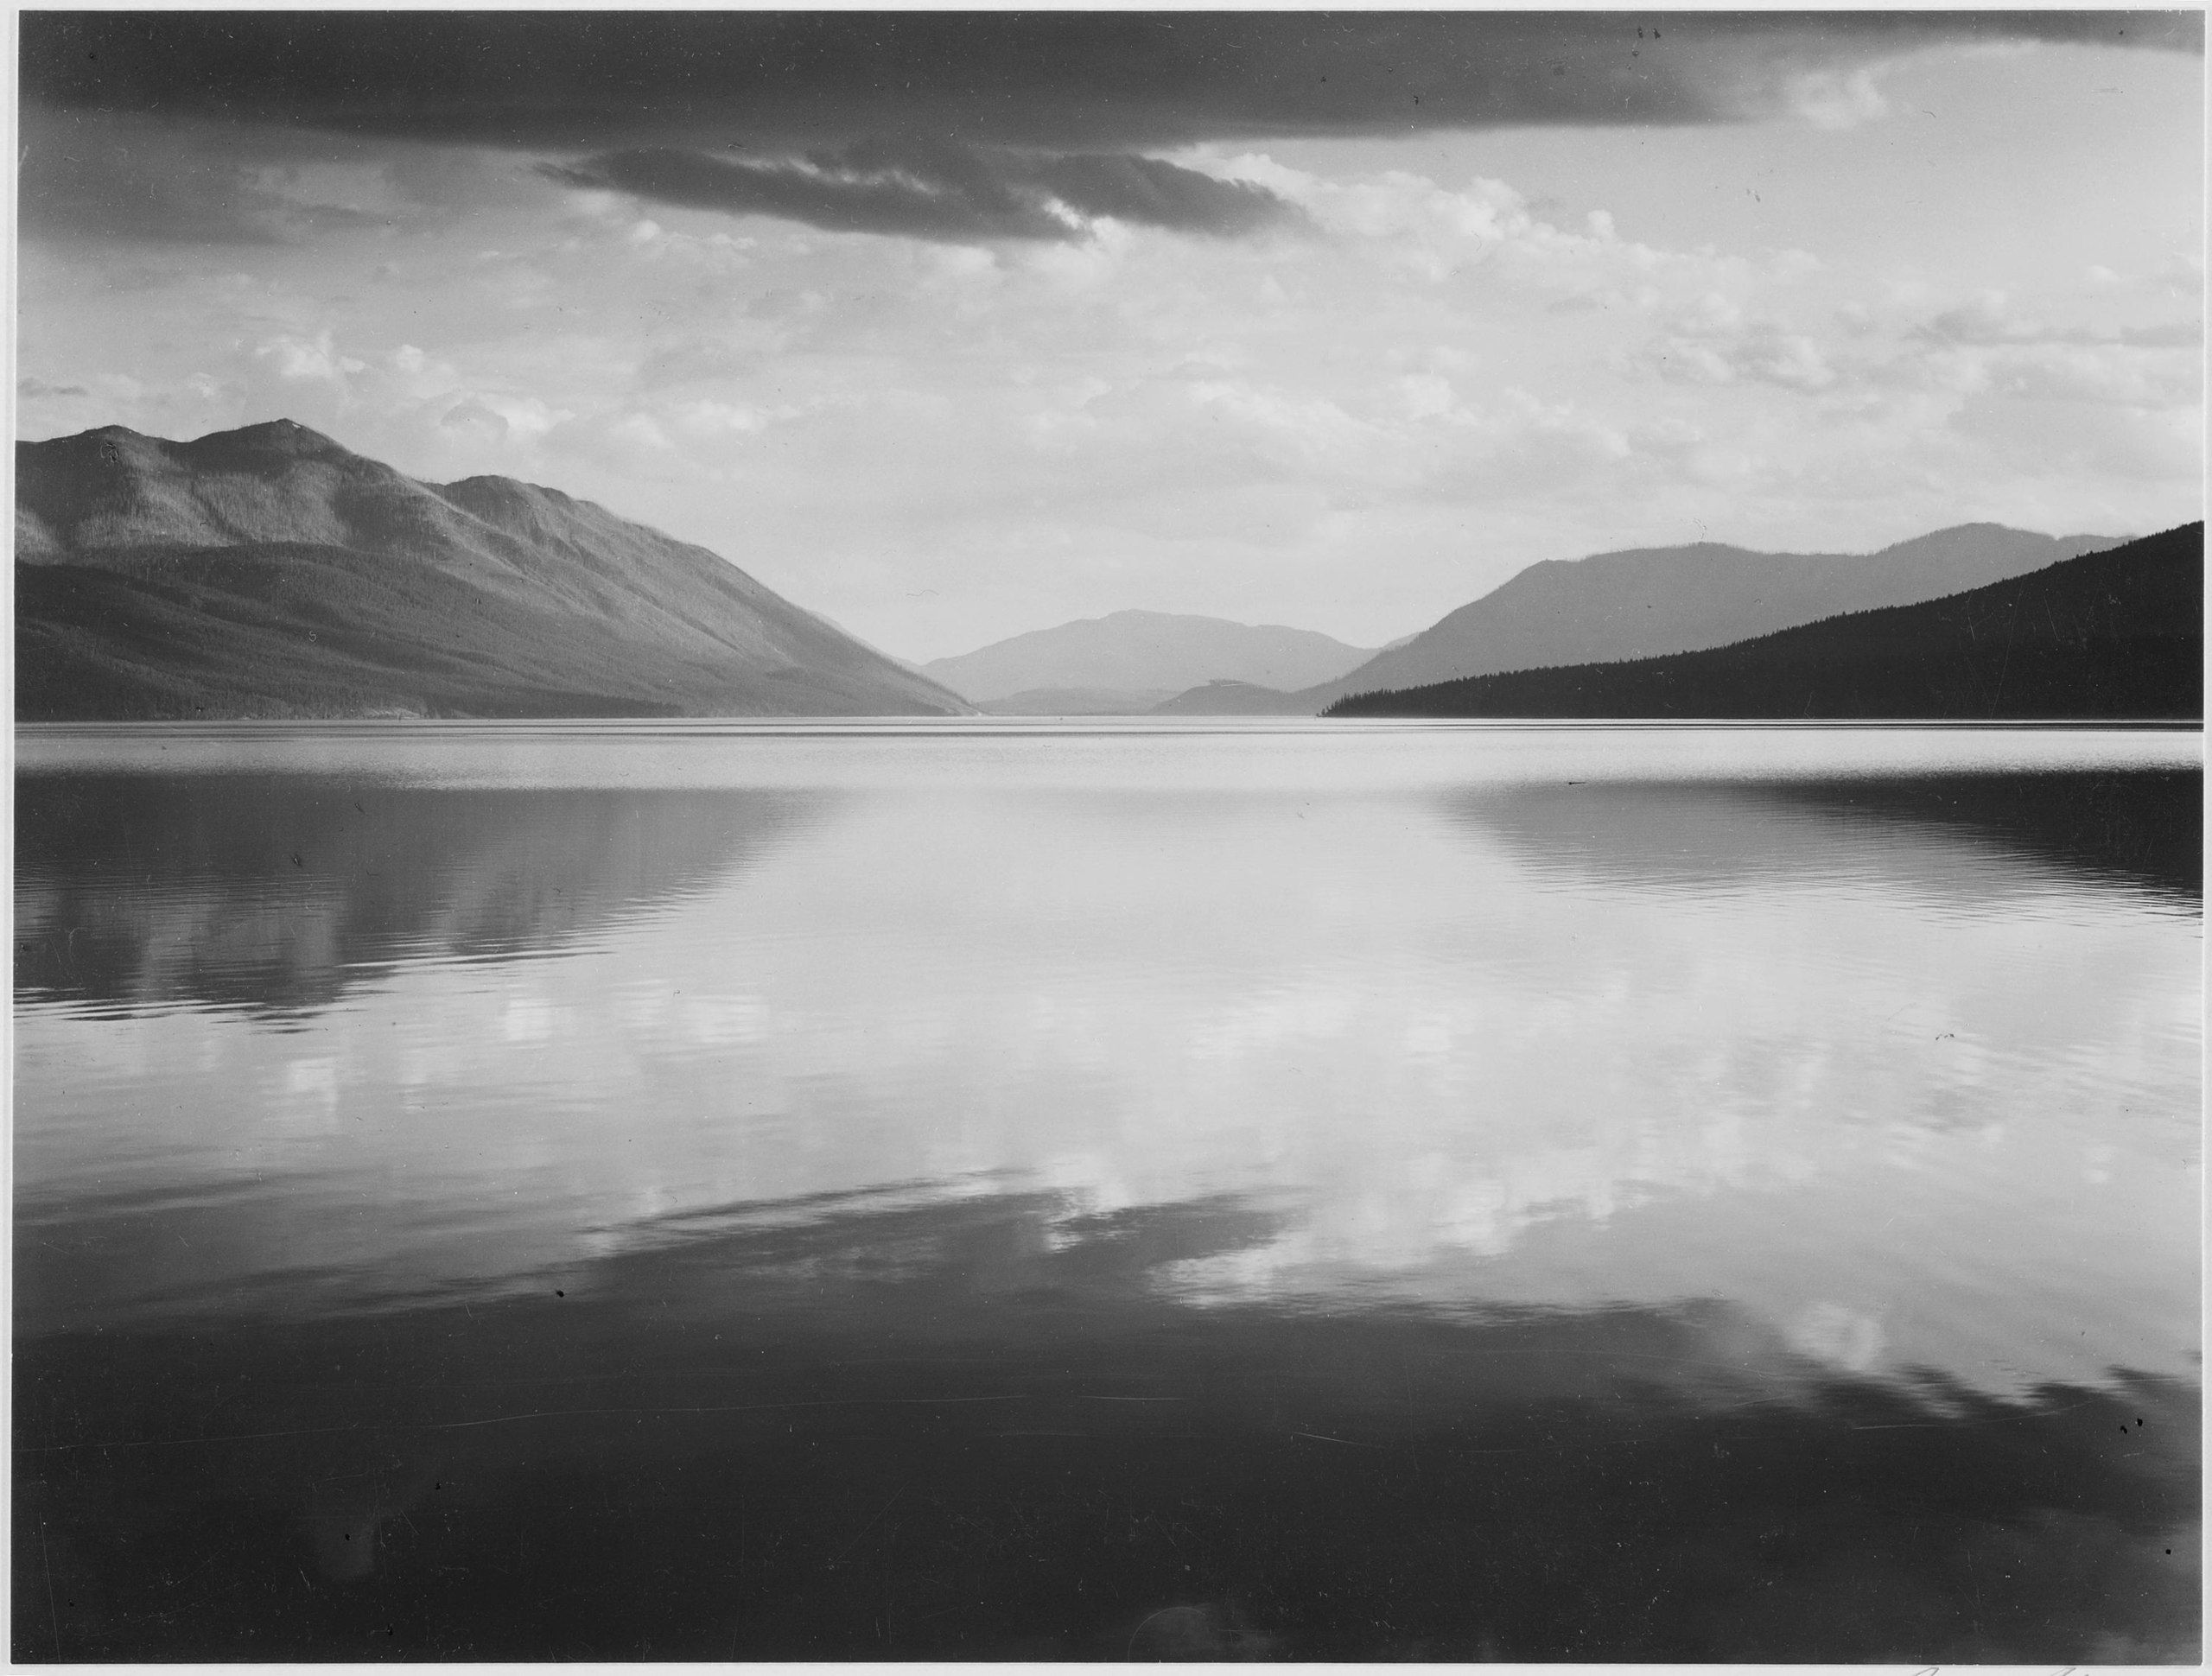 Ansel Adams landscape photo of water and mountains